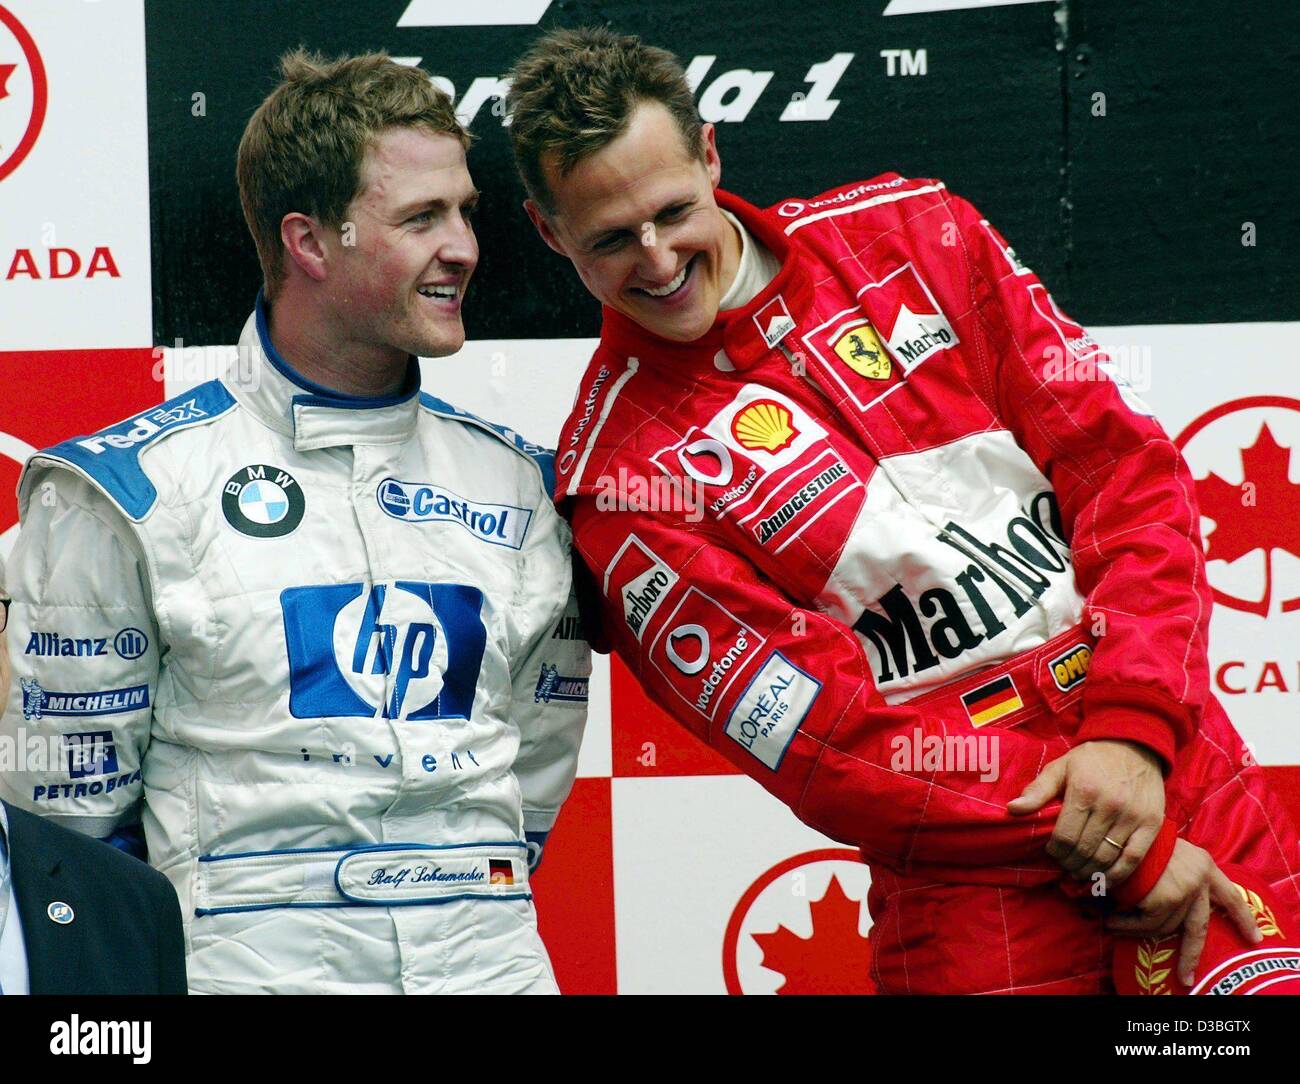 (dpa) - German formula one world champion Michael Schumacher  (Ferrari) (R) stands with his brother German formula one pilot Ralf Schumacher during the award ceremony on the Circuit Gilles Villeneuve formula one racing track after the Canadian Grand Prix in Montreal, Canada, 15 June 2003. Michael Sc Stock Photo